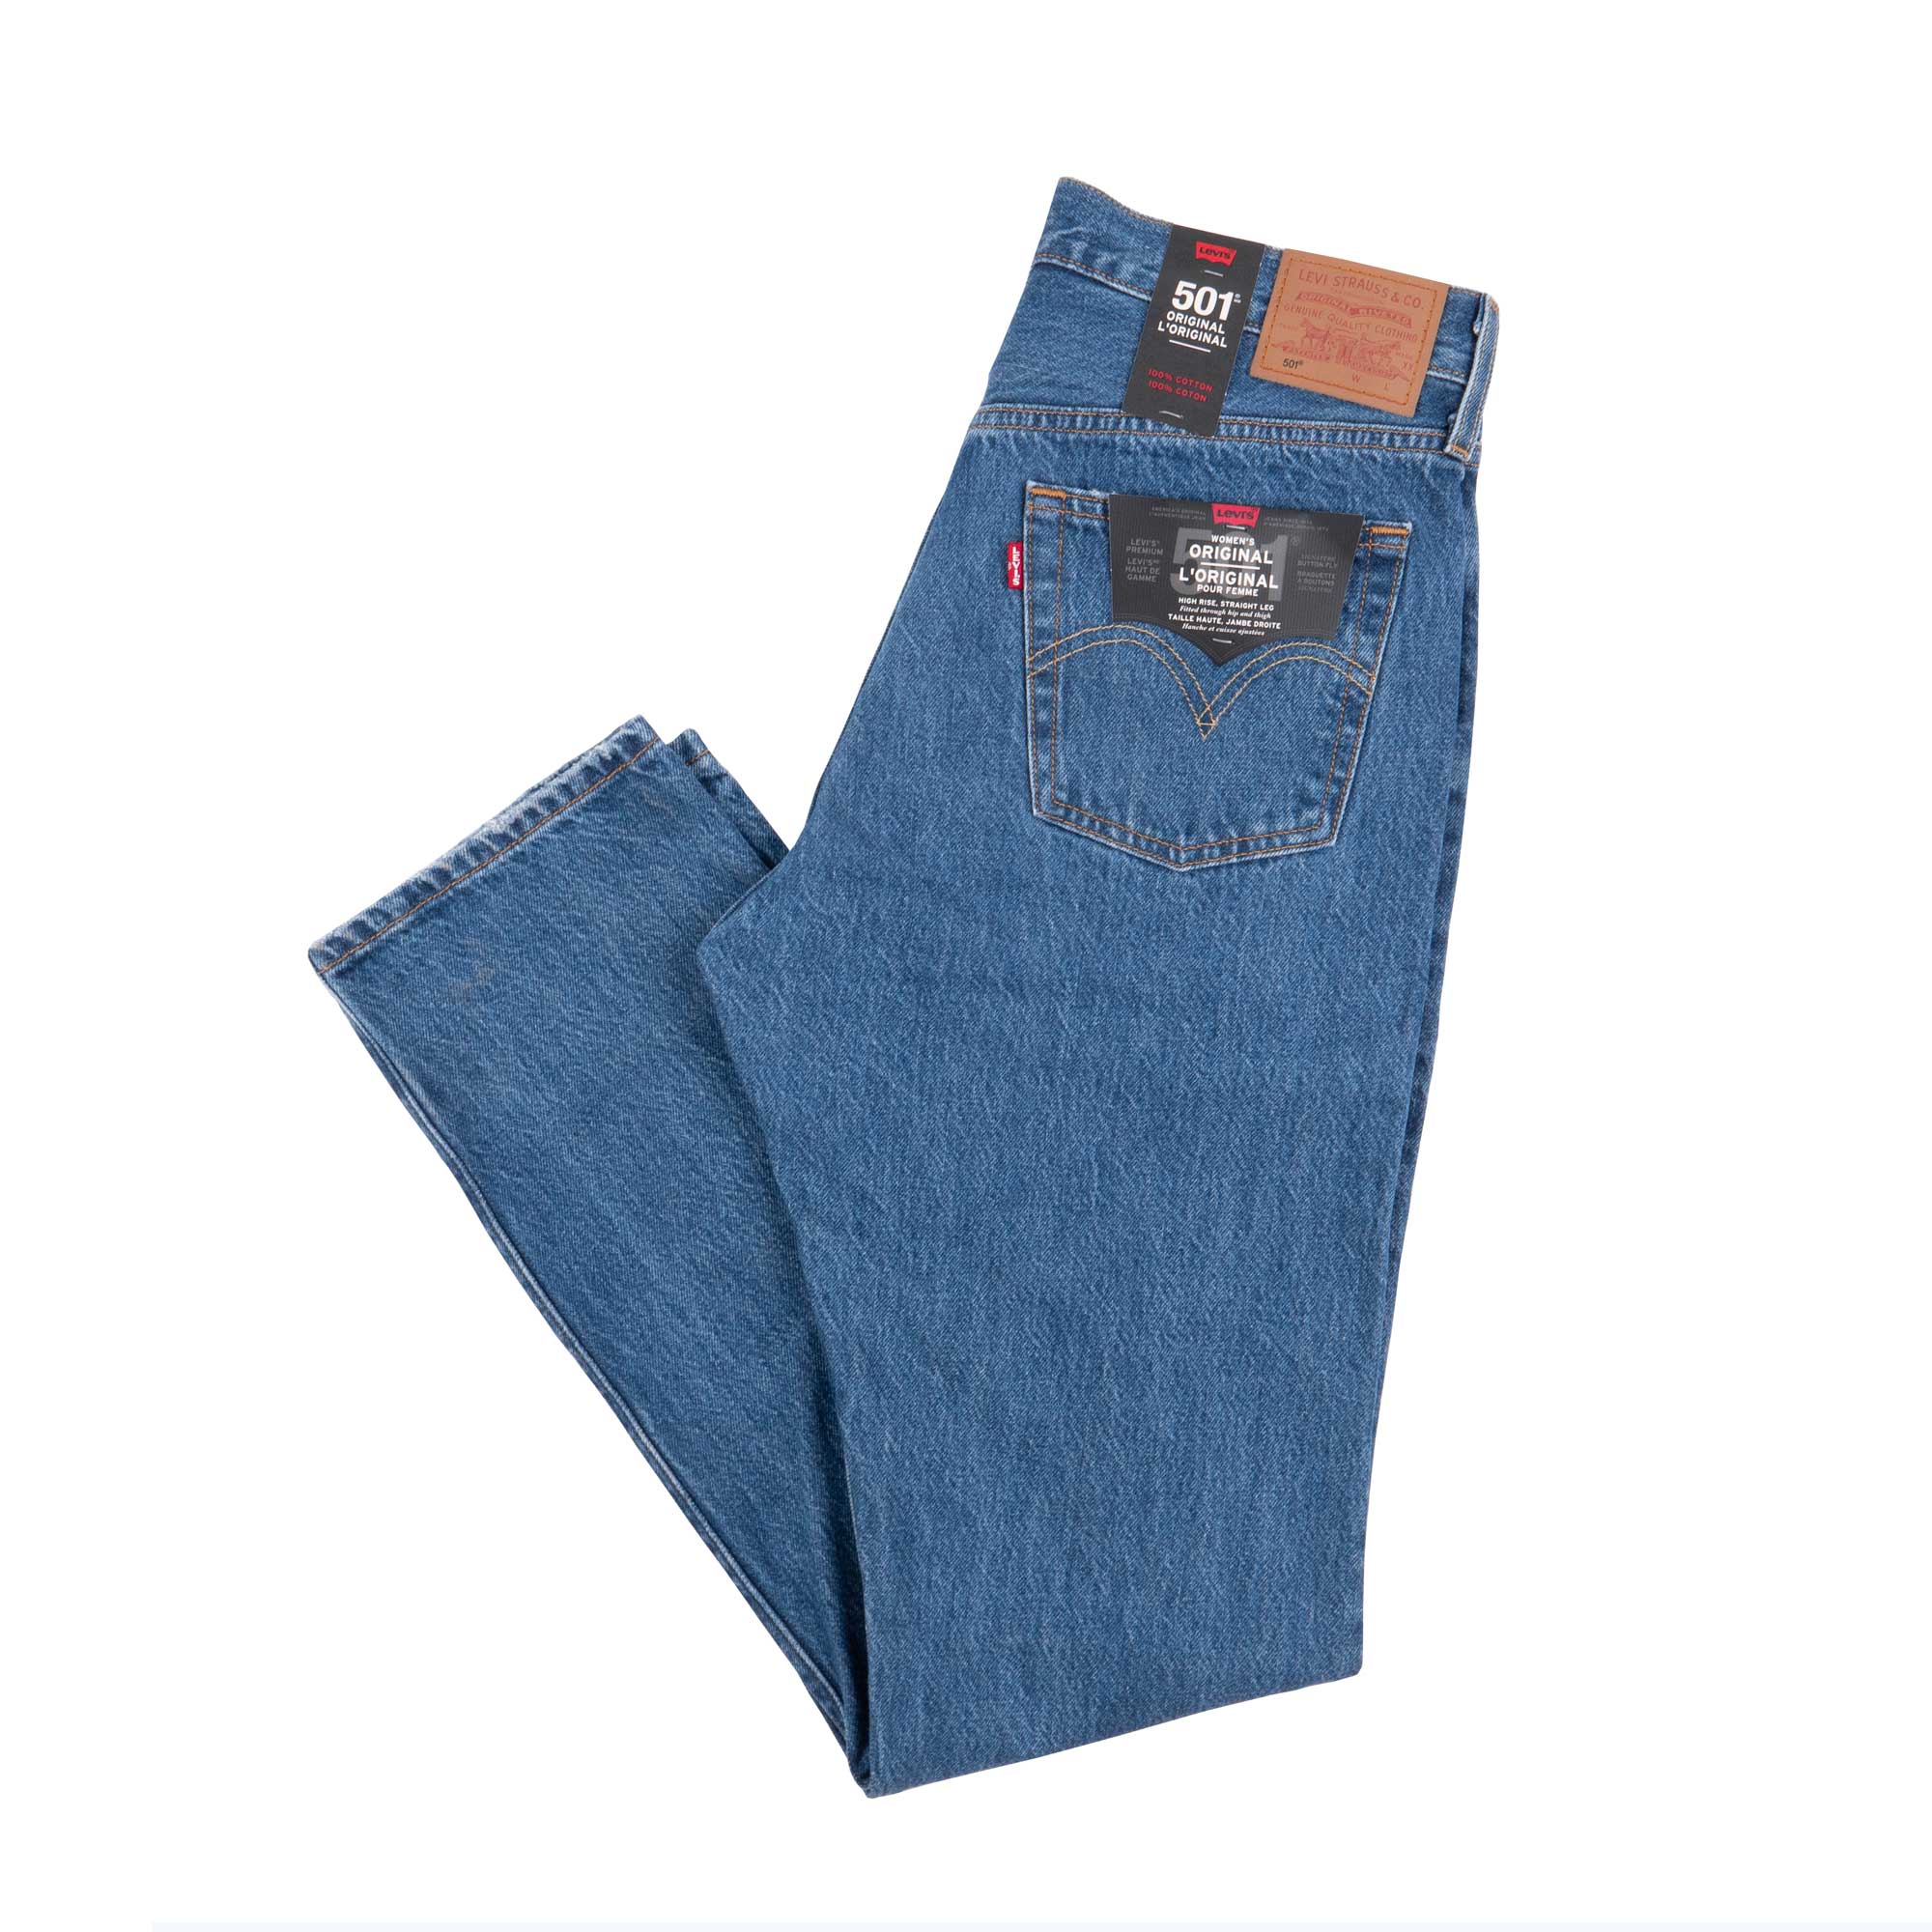 Levi's 501 Jeans For Women – Norwood